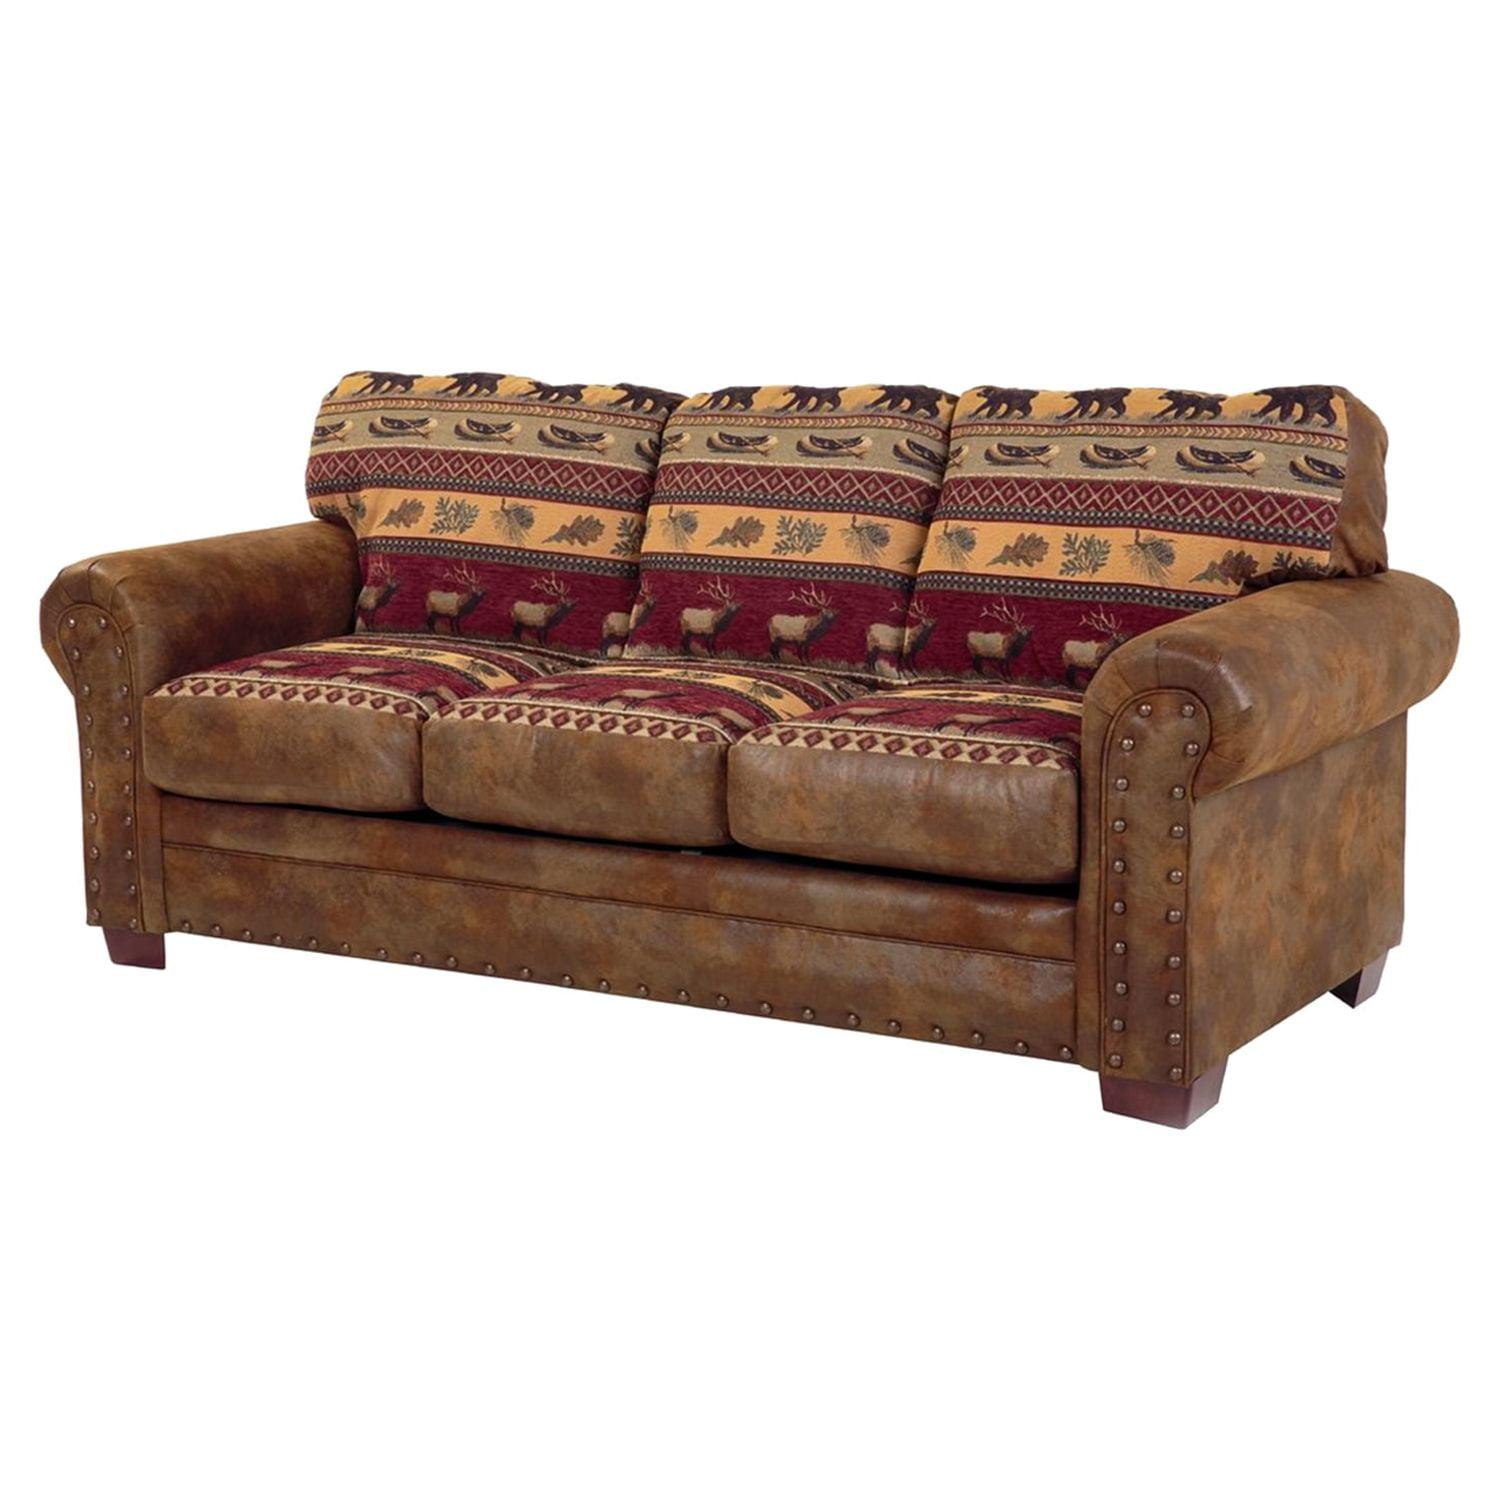 Rustic Brown Faux Leather Queen Sleeper Sofa with Nailhead Accents